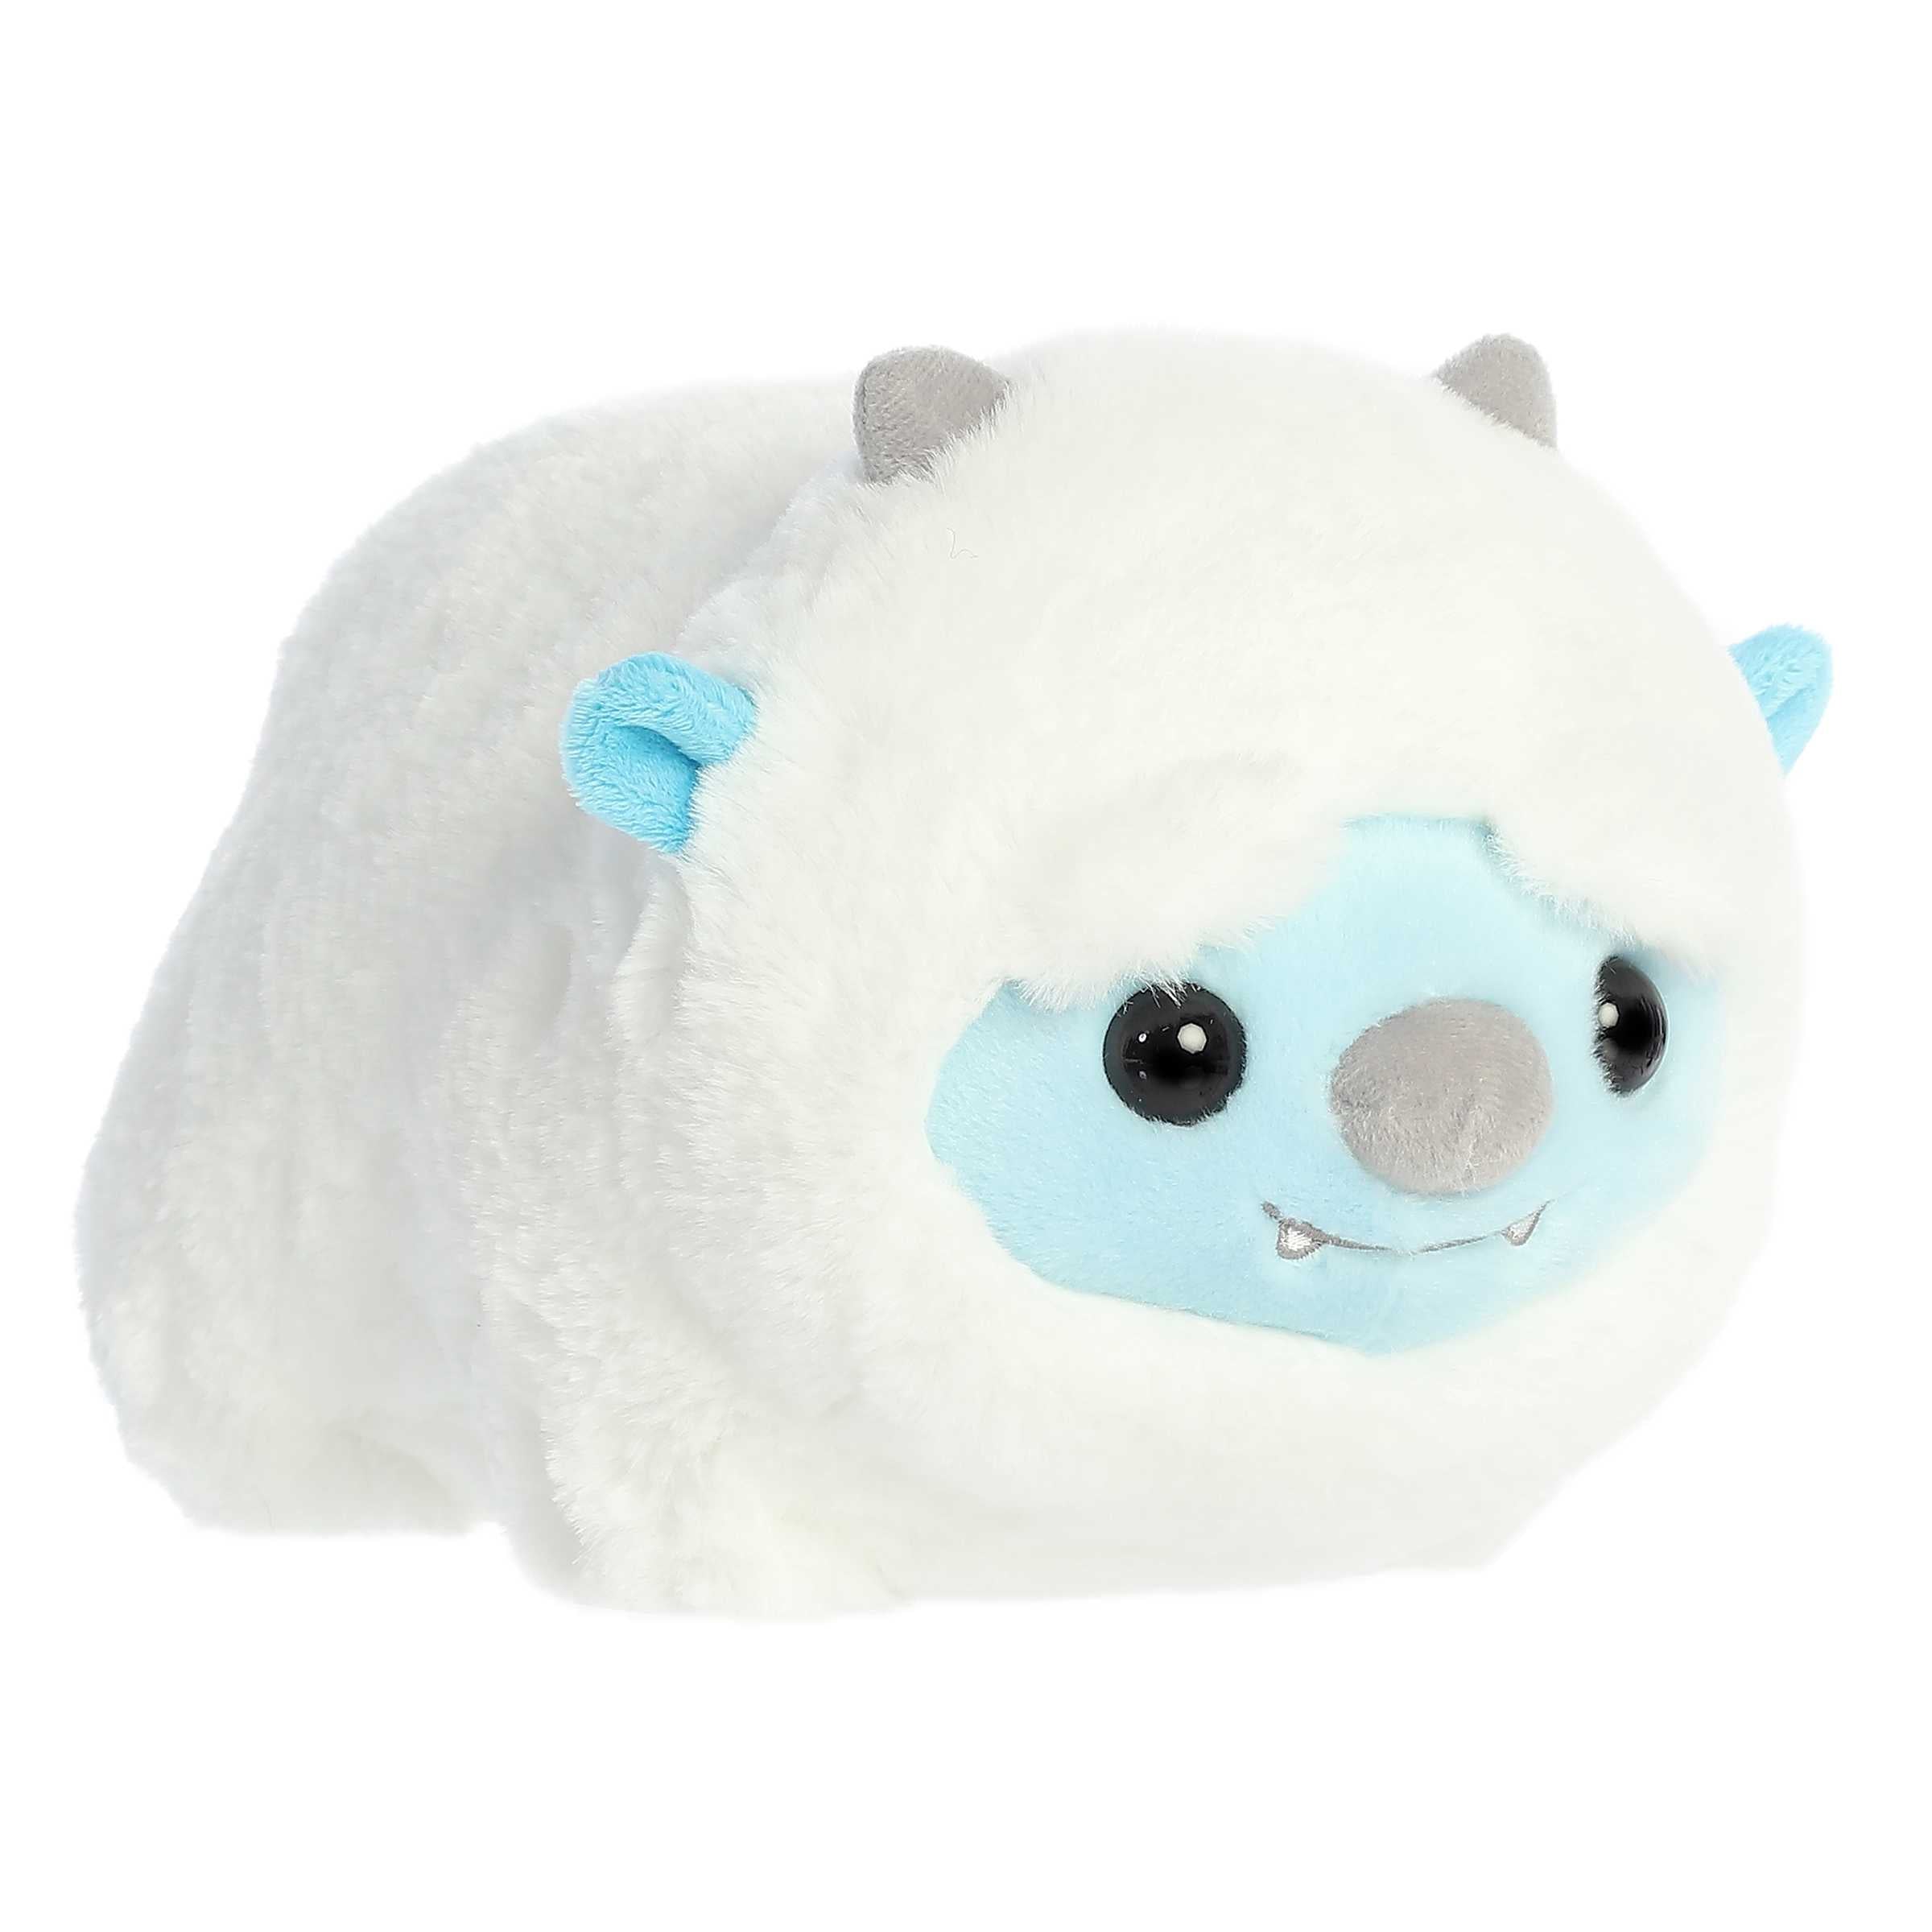 Adorable round white yeti plushie with stubby arms and legs, blue accents on their face and ears, and tiny silver horns.